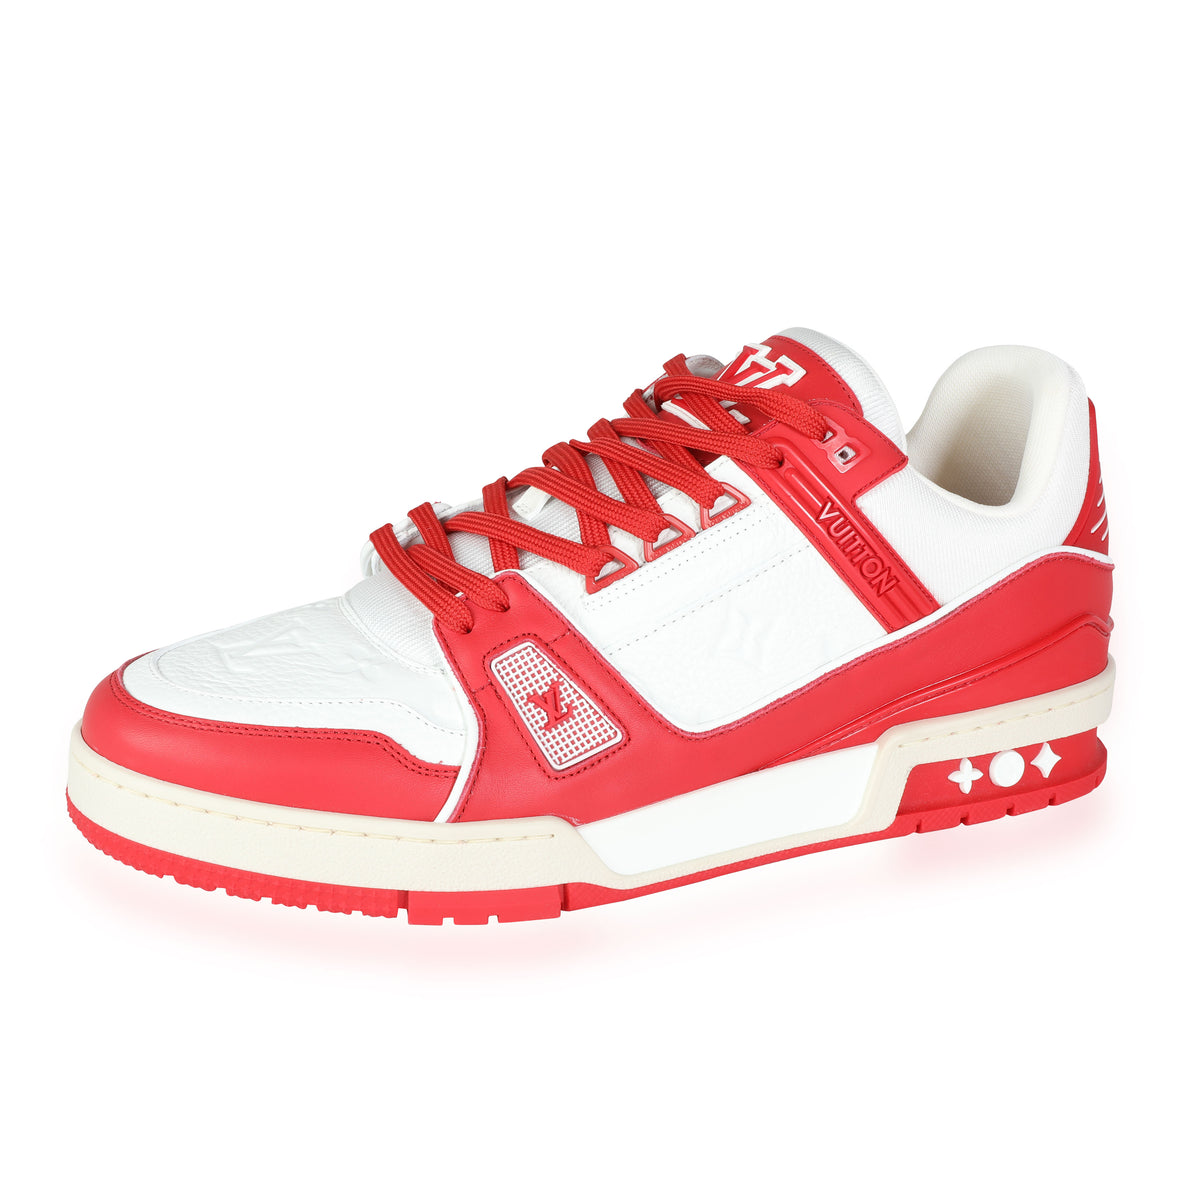 Louis Vuitton - Product (RED) x Louis Vuitton Trainer 'Red' (9 UK), myGemma